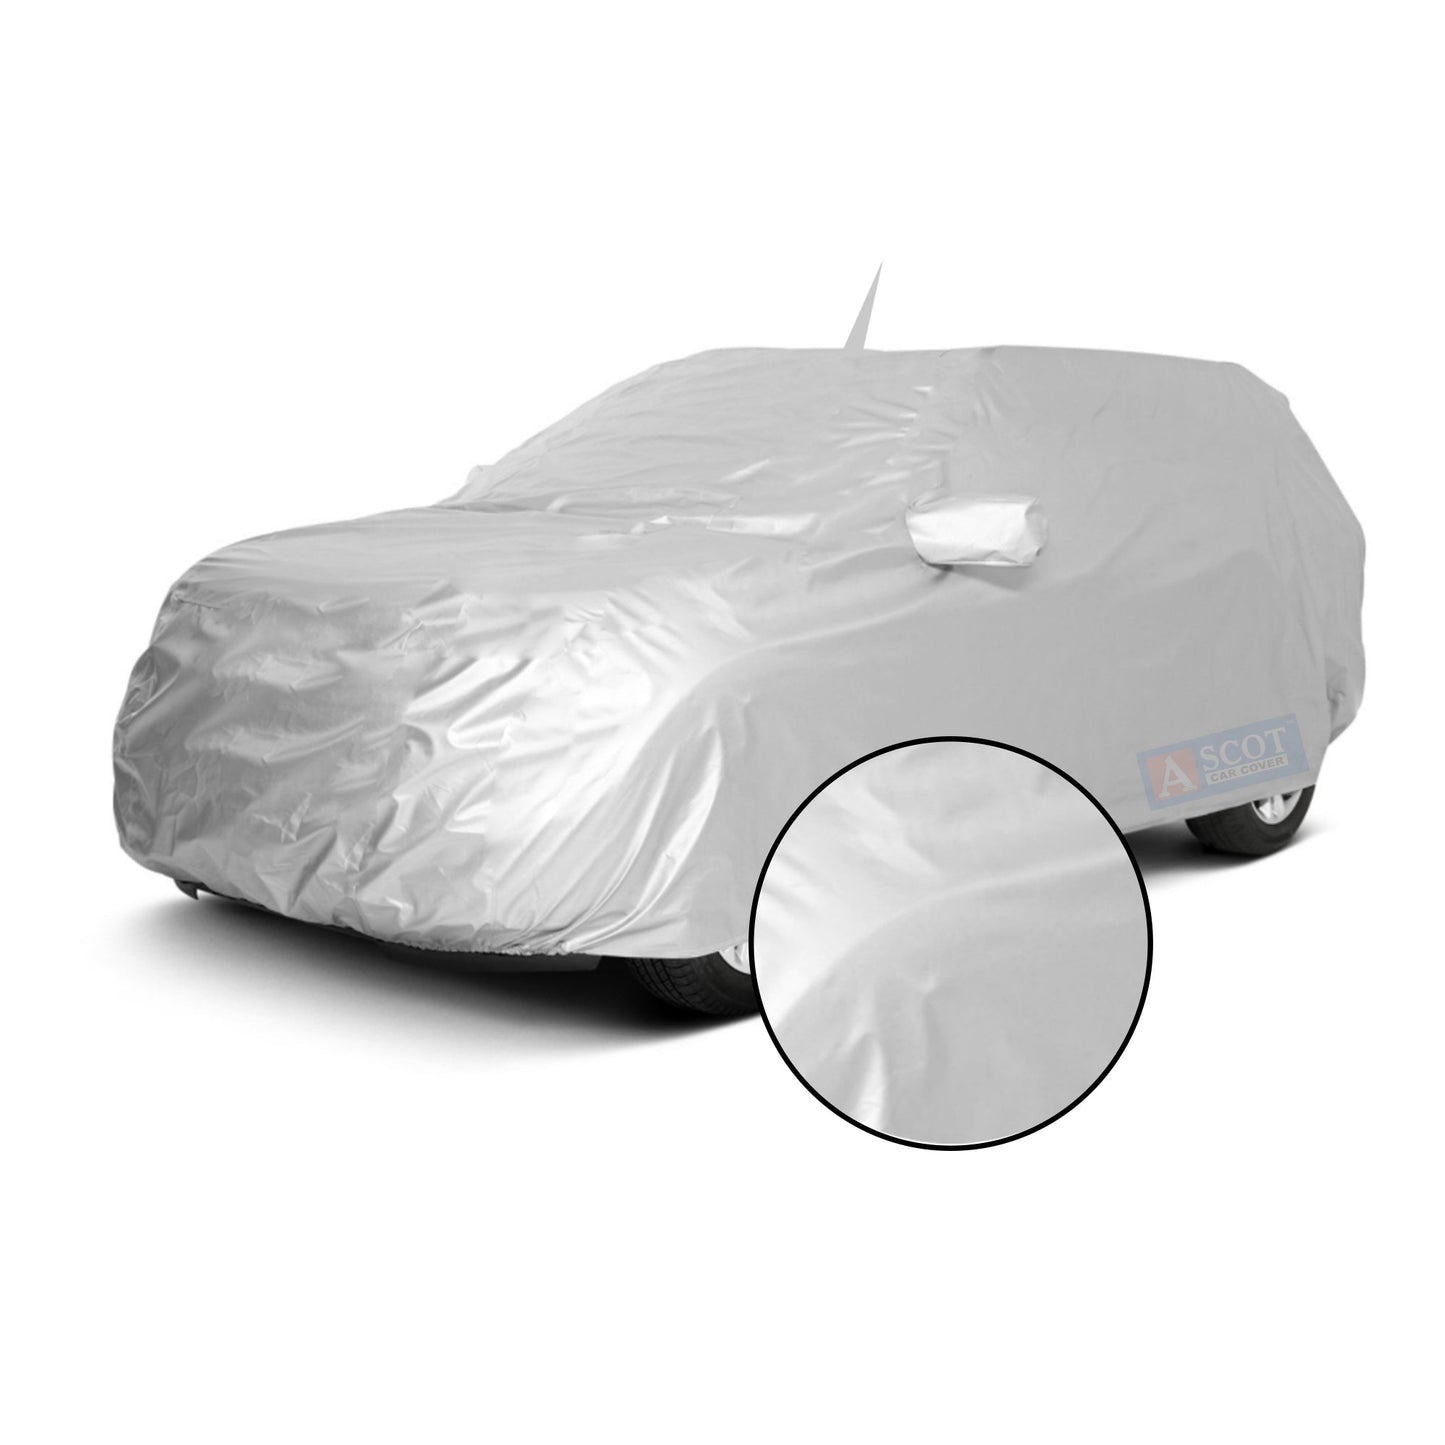 Ascot Mahindra XUV 500 Car Body Cover Dust Proof, Trippel Stitched